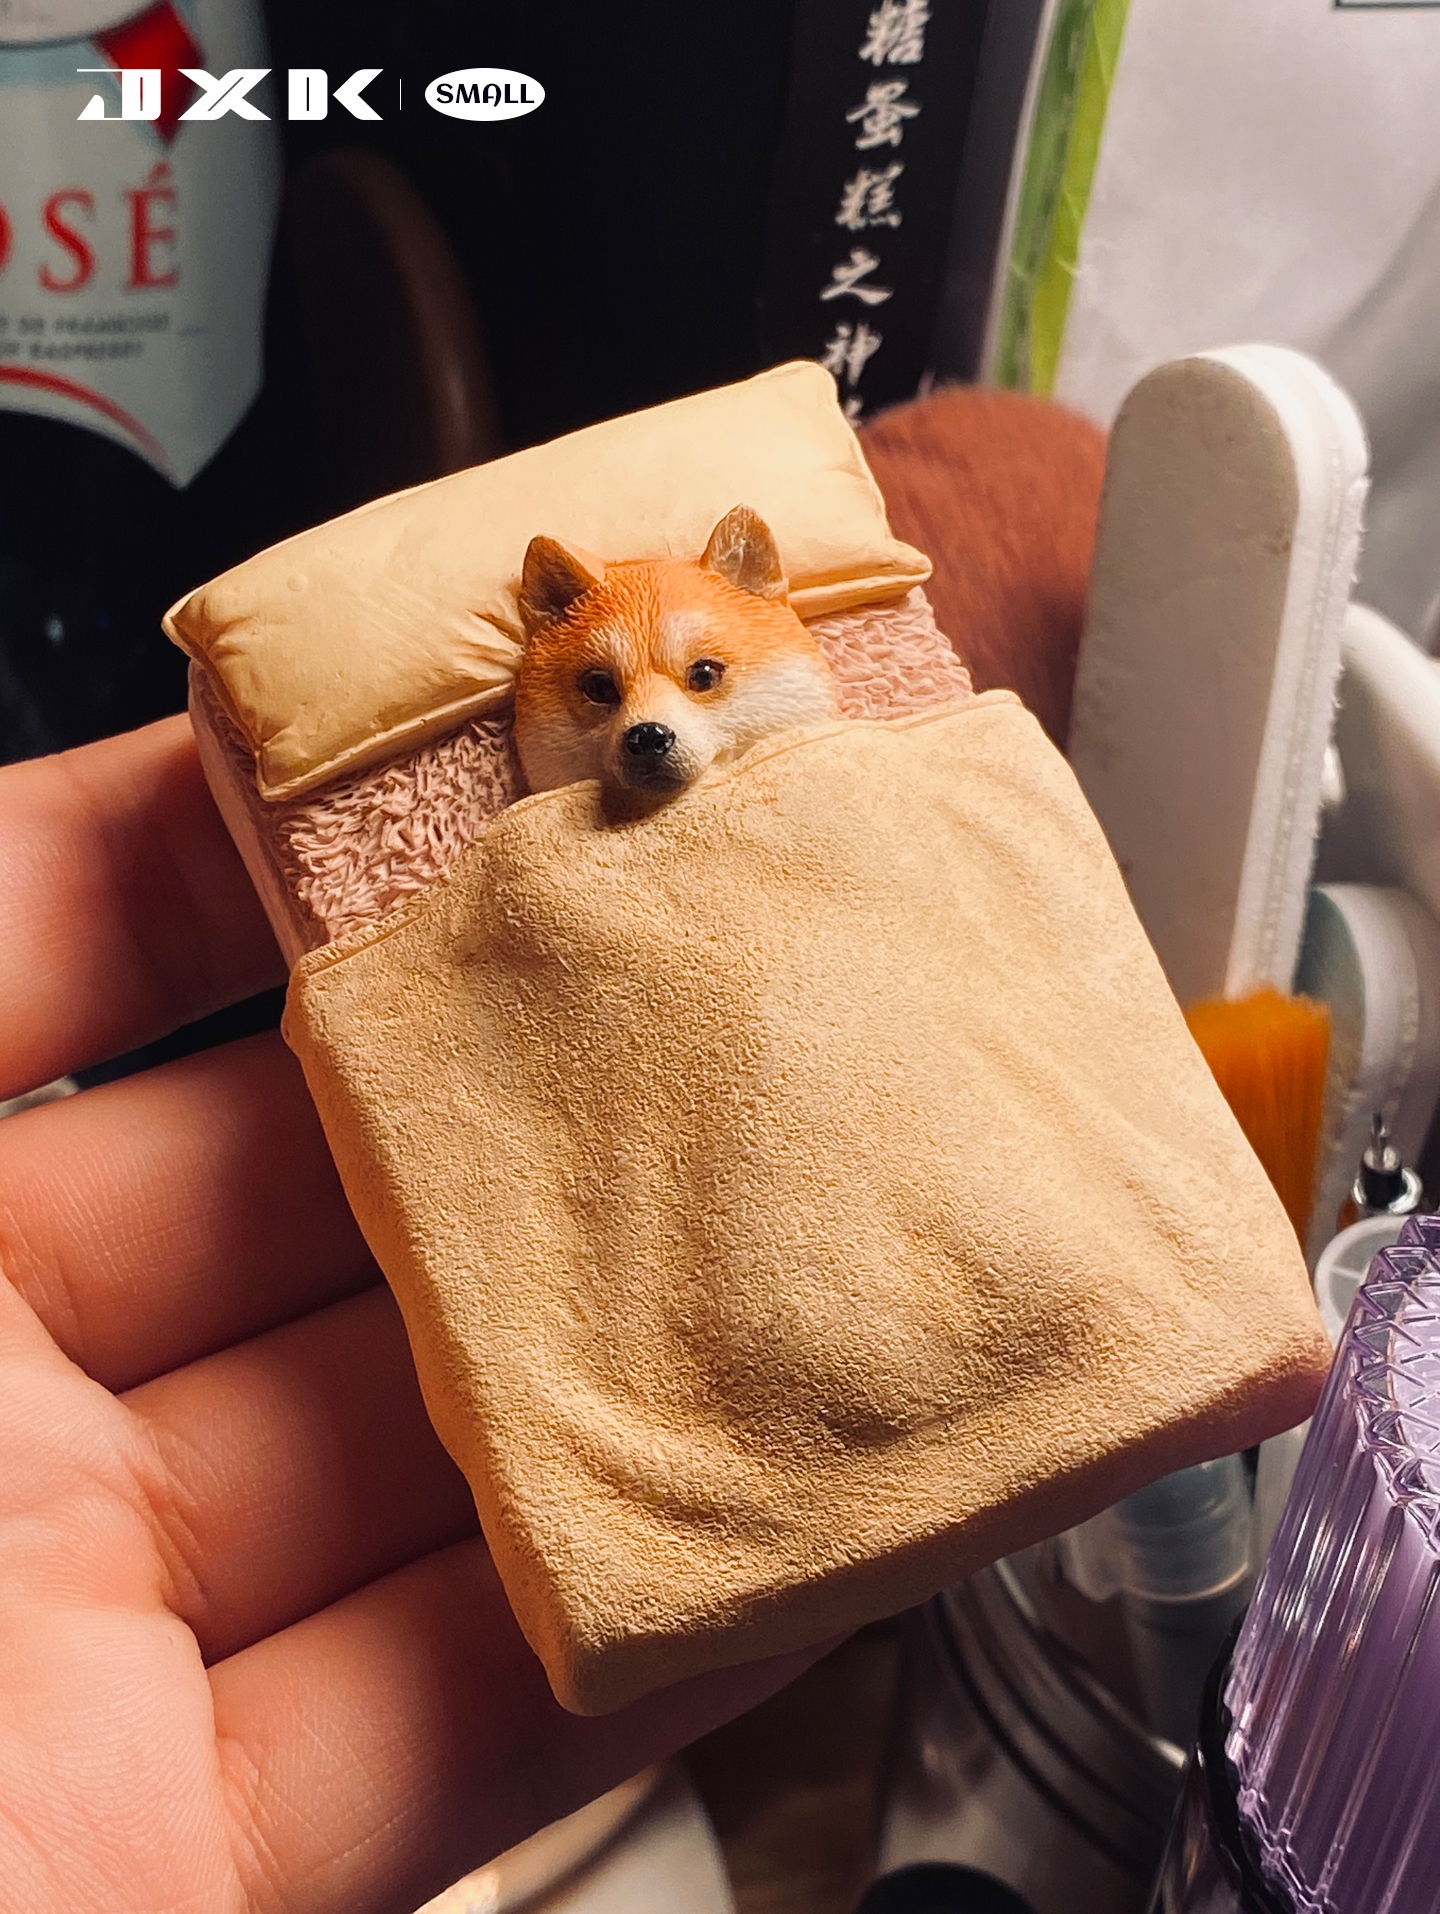 Official Genuine Single Dog Action Figure Blanket Cover Sleeping Shiba Inu Soothing Hand Craft Decor Gift